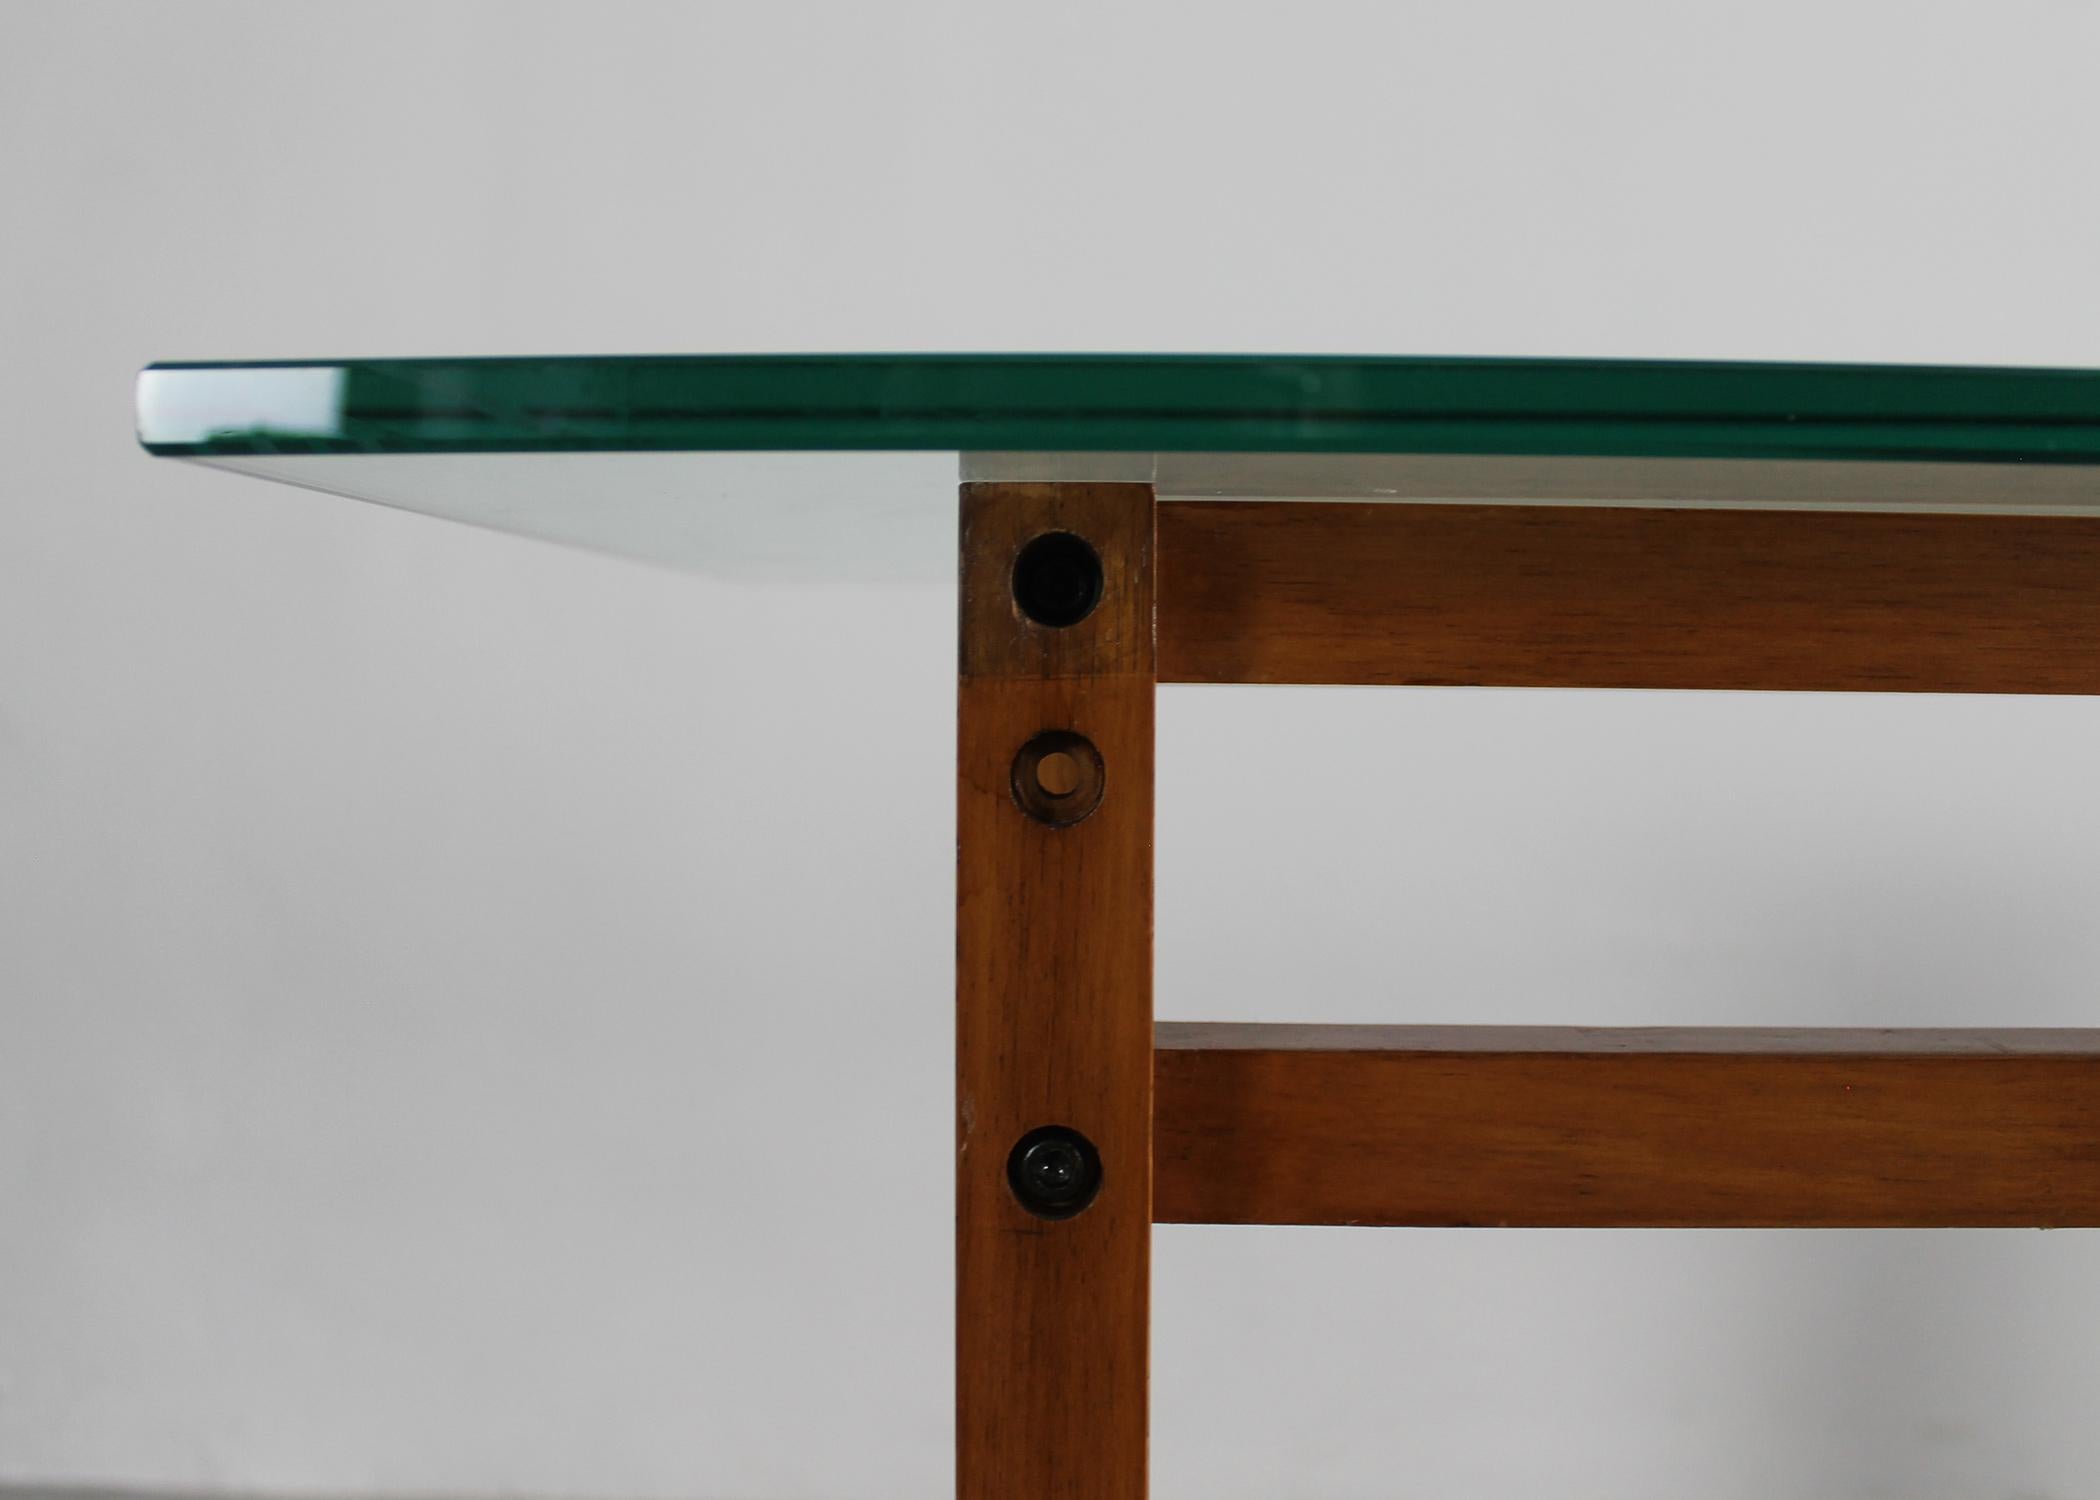 Lella & Massimo Vignelli Ara Console Table in Wood and Glass by Driade 1974  In Good Condition For Sale In Montecatini Terme, IT